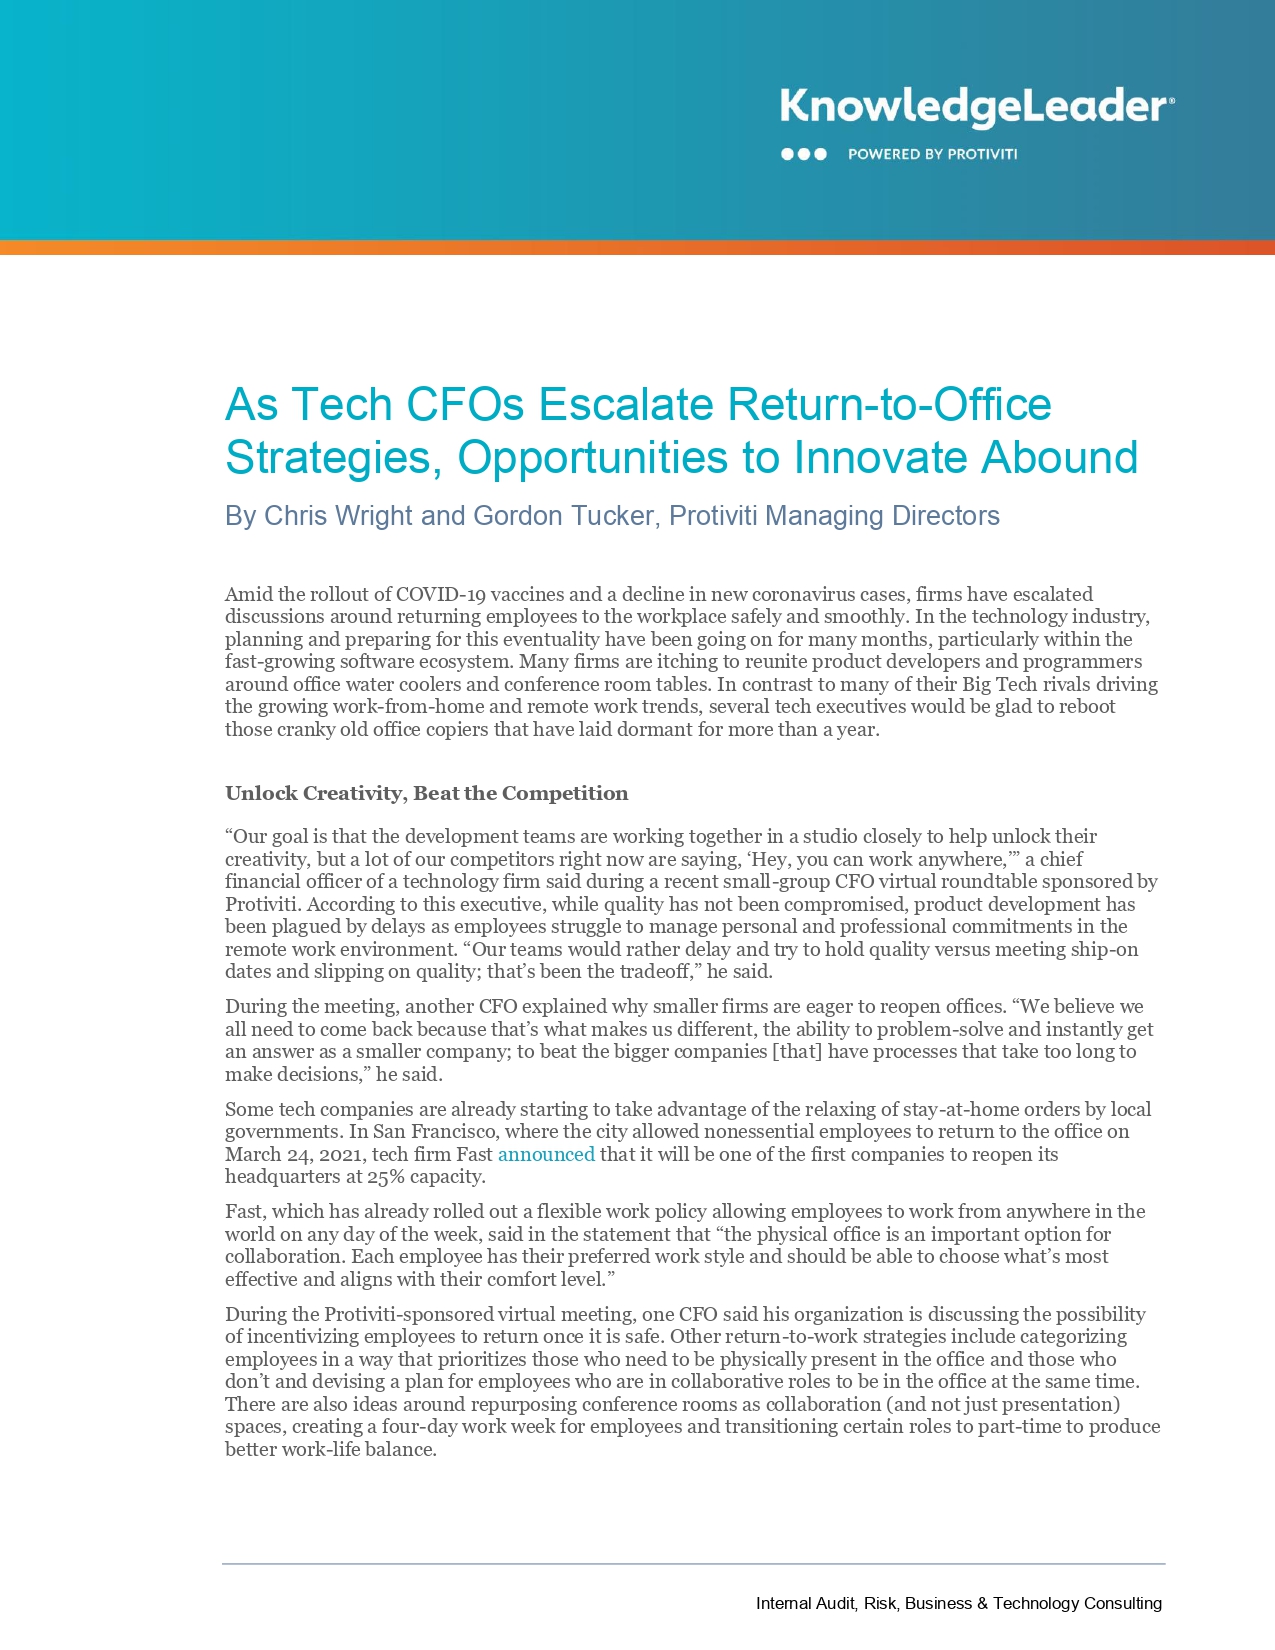 As Tech CFOs Escalate Return-to-Office Strategies, Opportunities to Innovate Abound